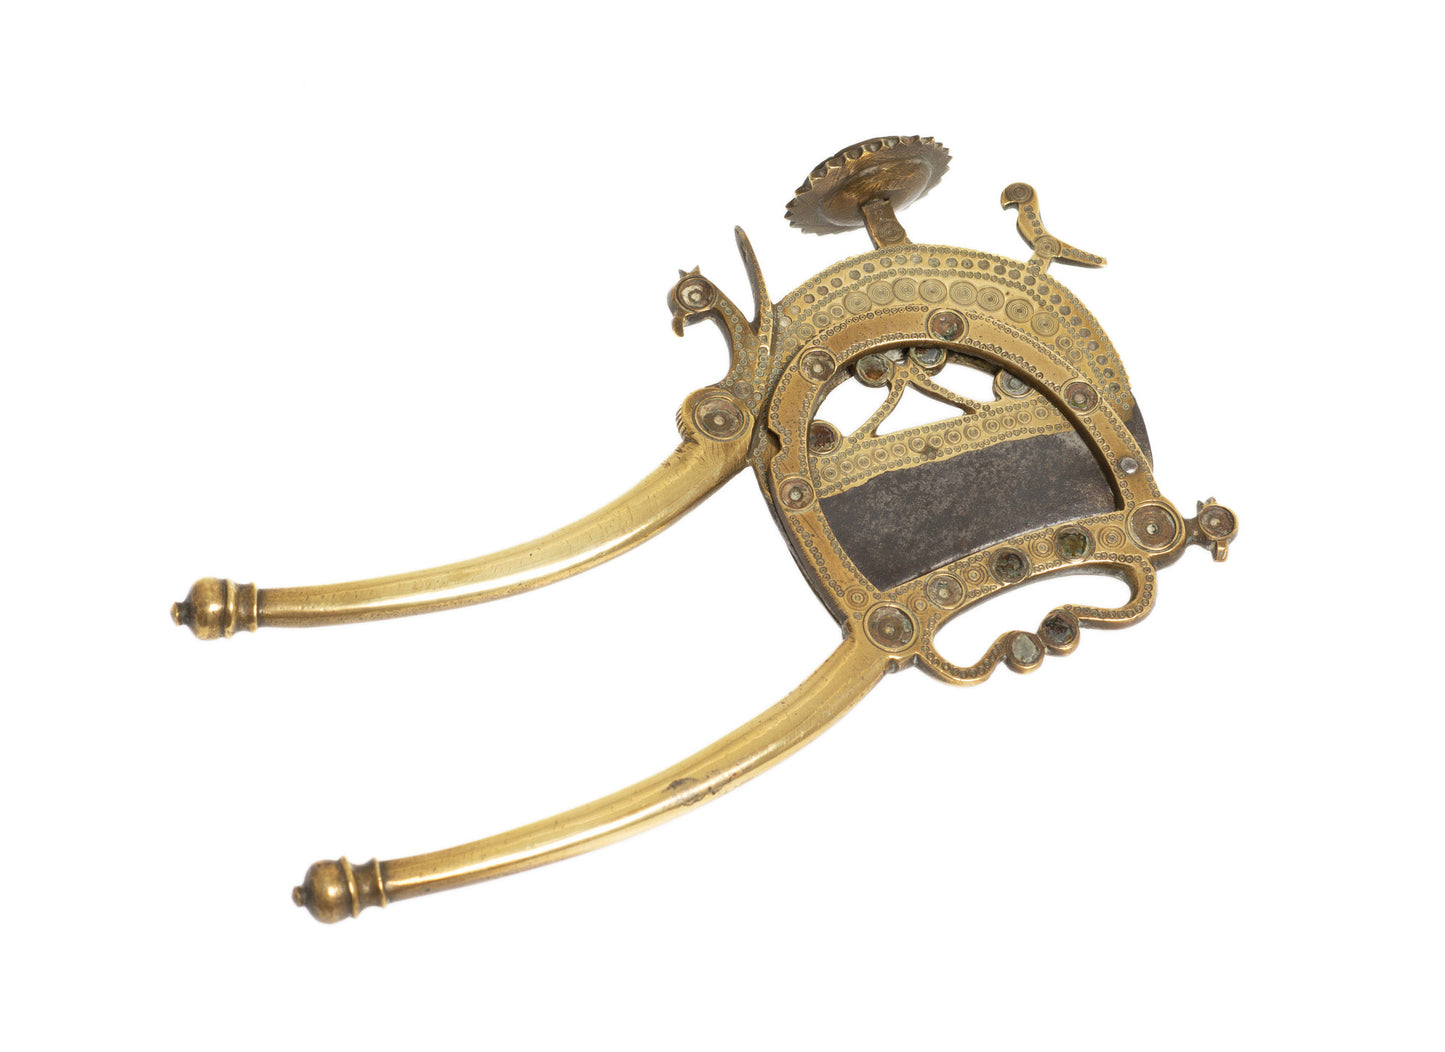 Antique North West Indian Brass Betel Nut Cutter with Peacock & Steel Blade (Code 2716)